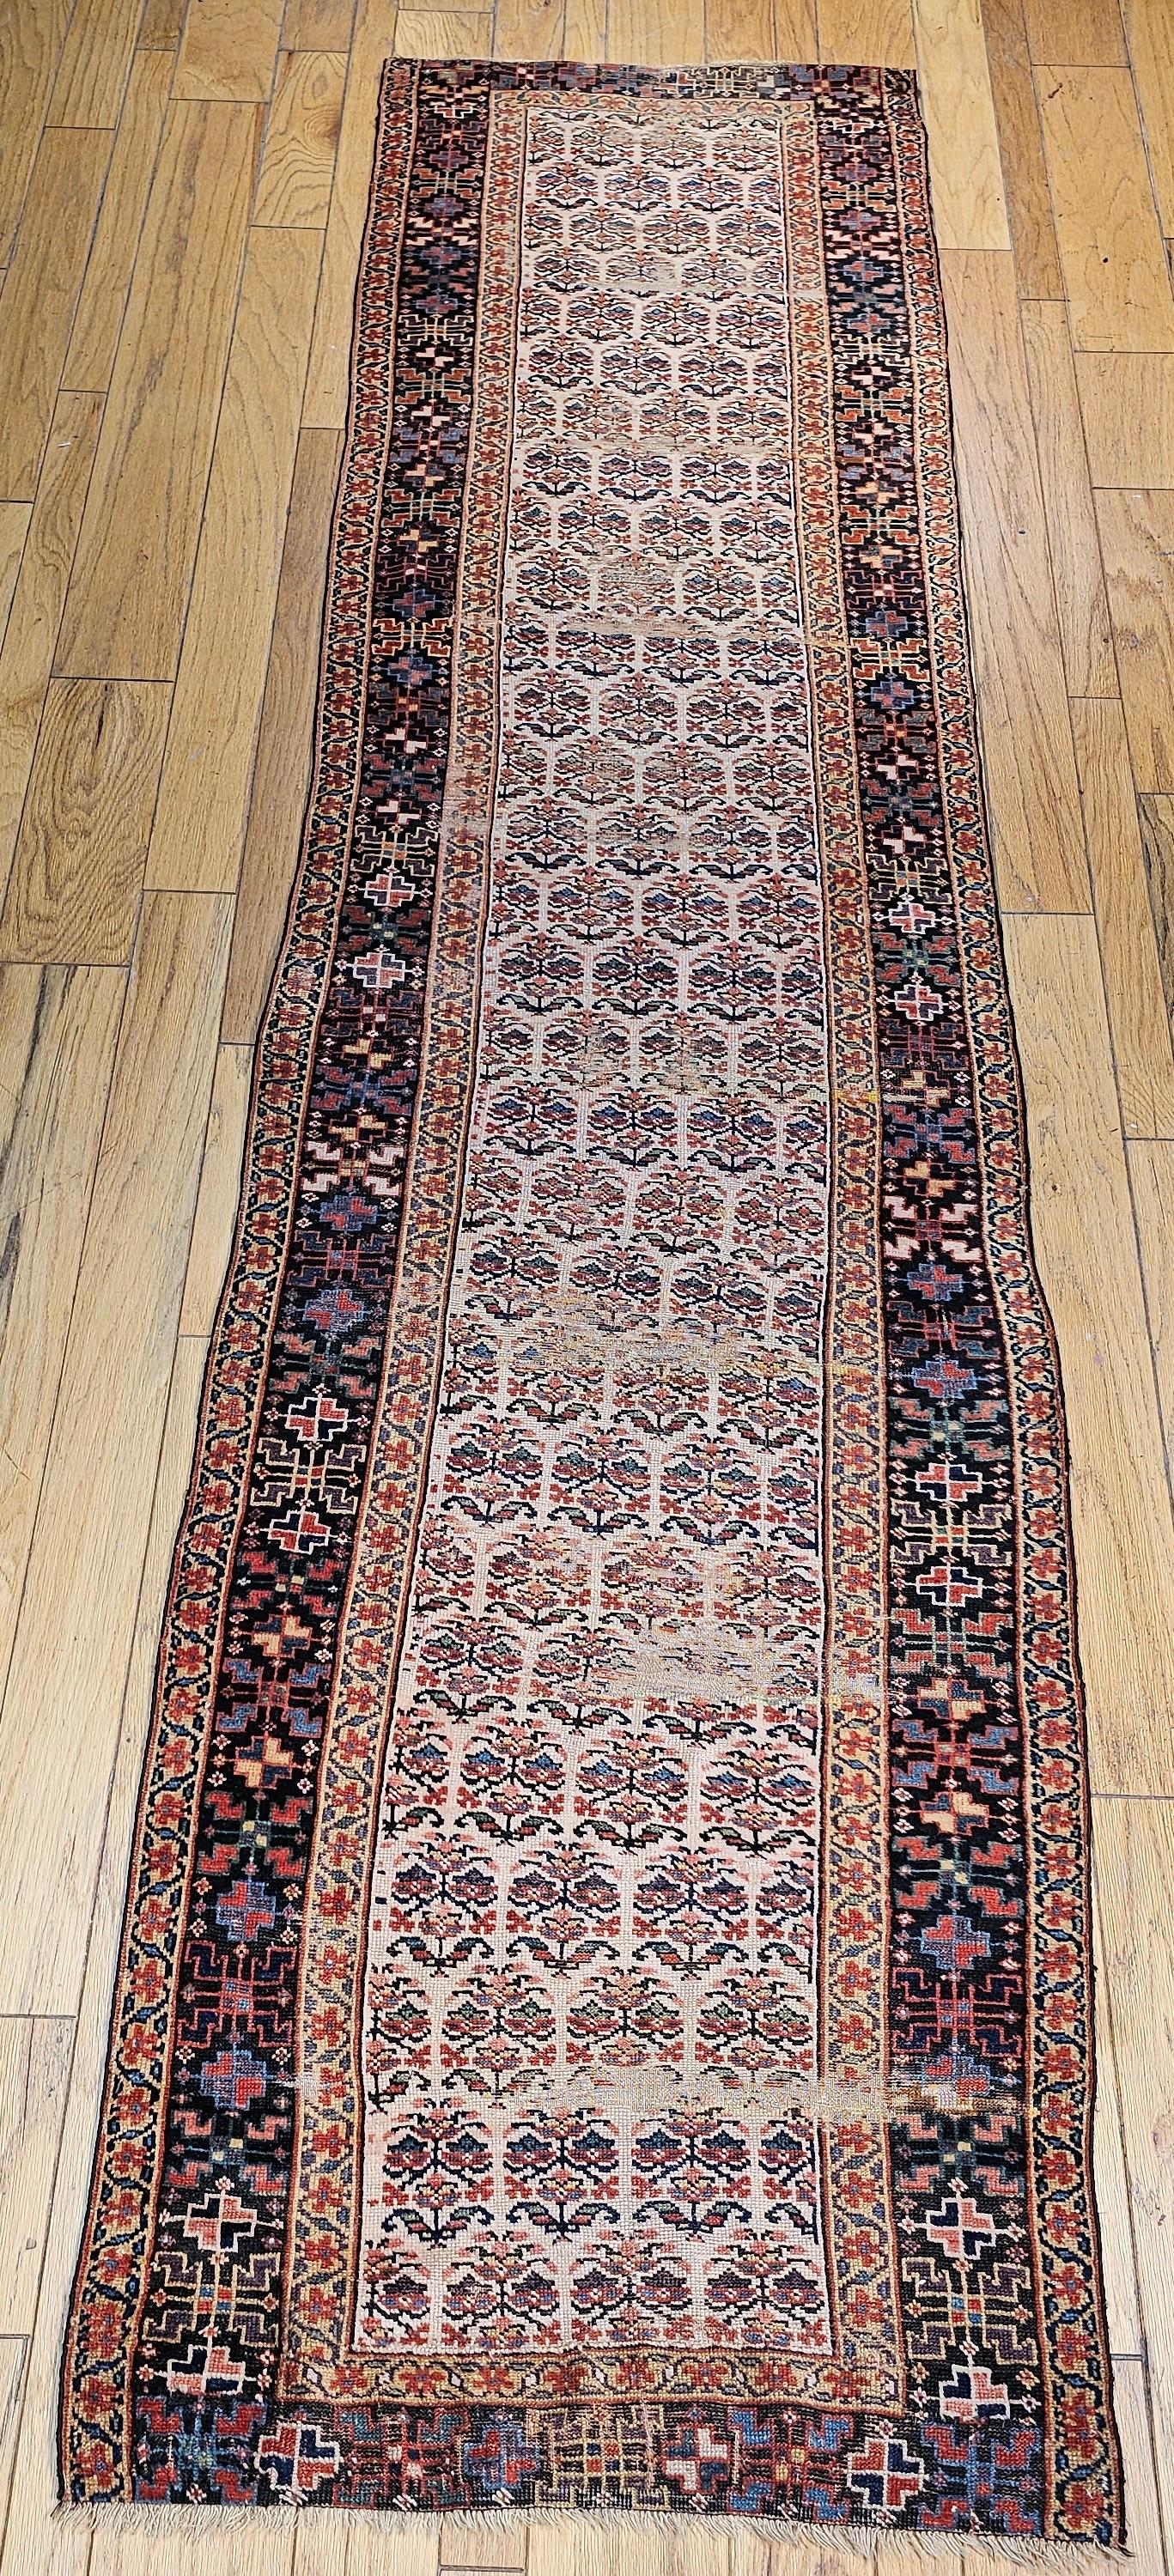 Vintage Persian Bidjar runner circa the 4th quarter of the 19th century. The field is in ivory which is extremely desirable with flower heads which is considered a variation of the paisley pattern. The major border is in navy background with